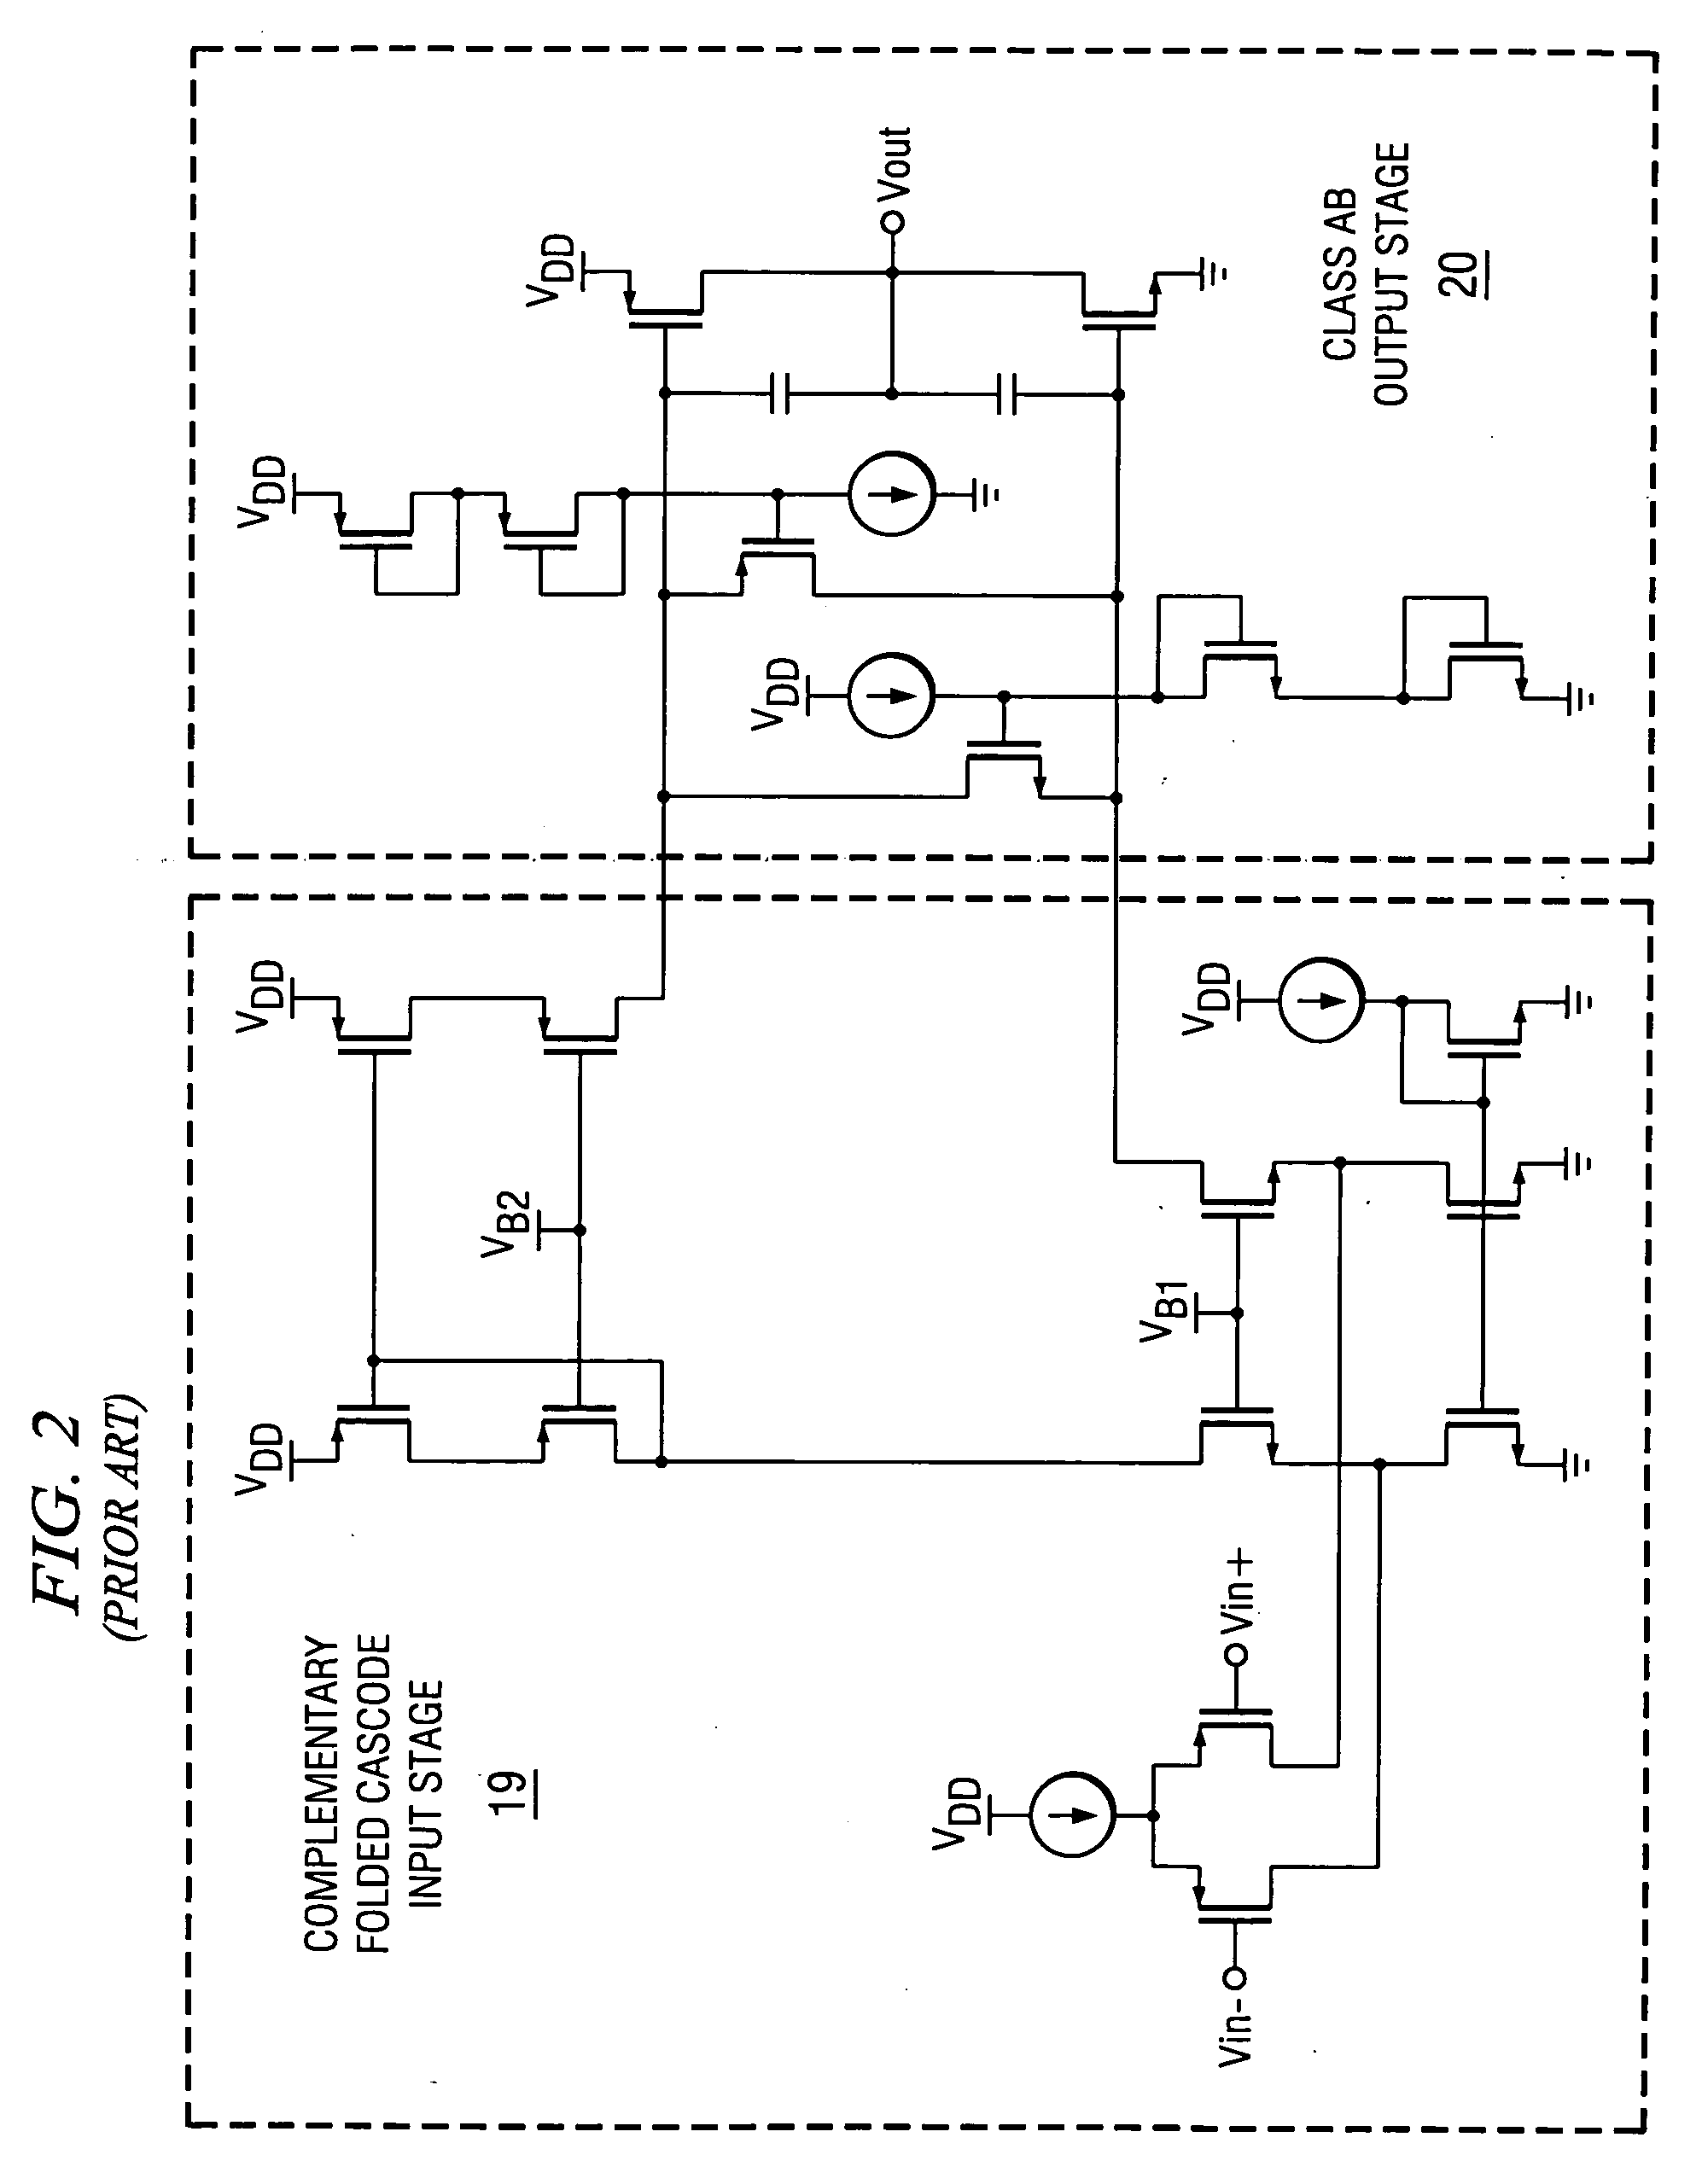 Slew rate enhancement circuitry for folded cascode amplifier